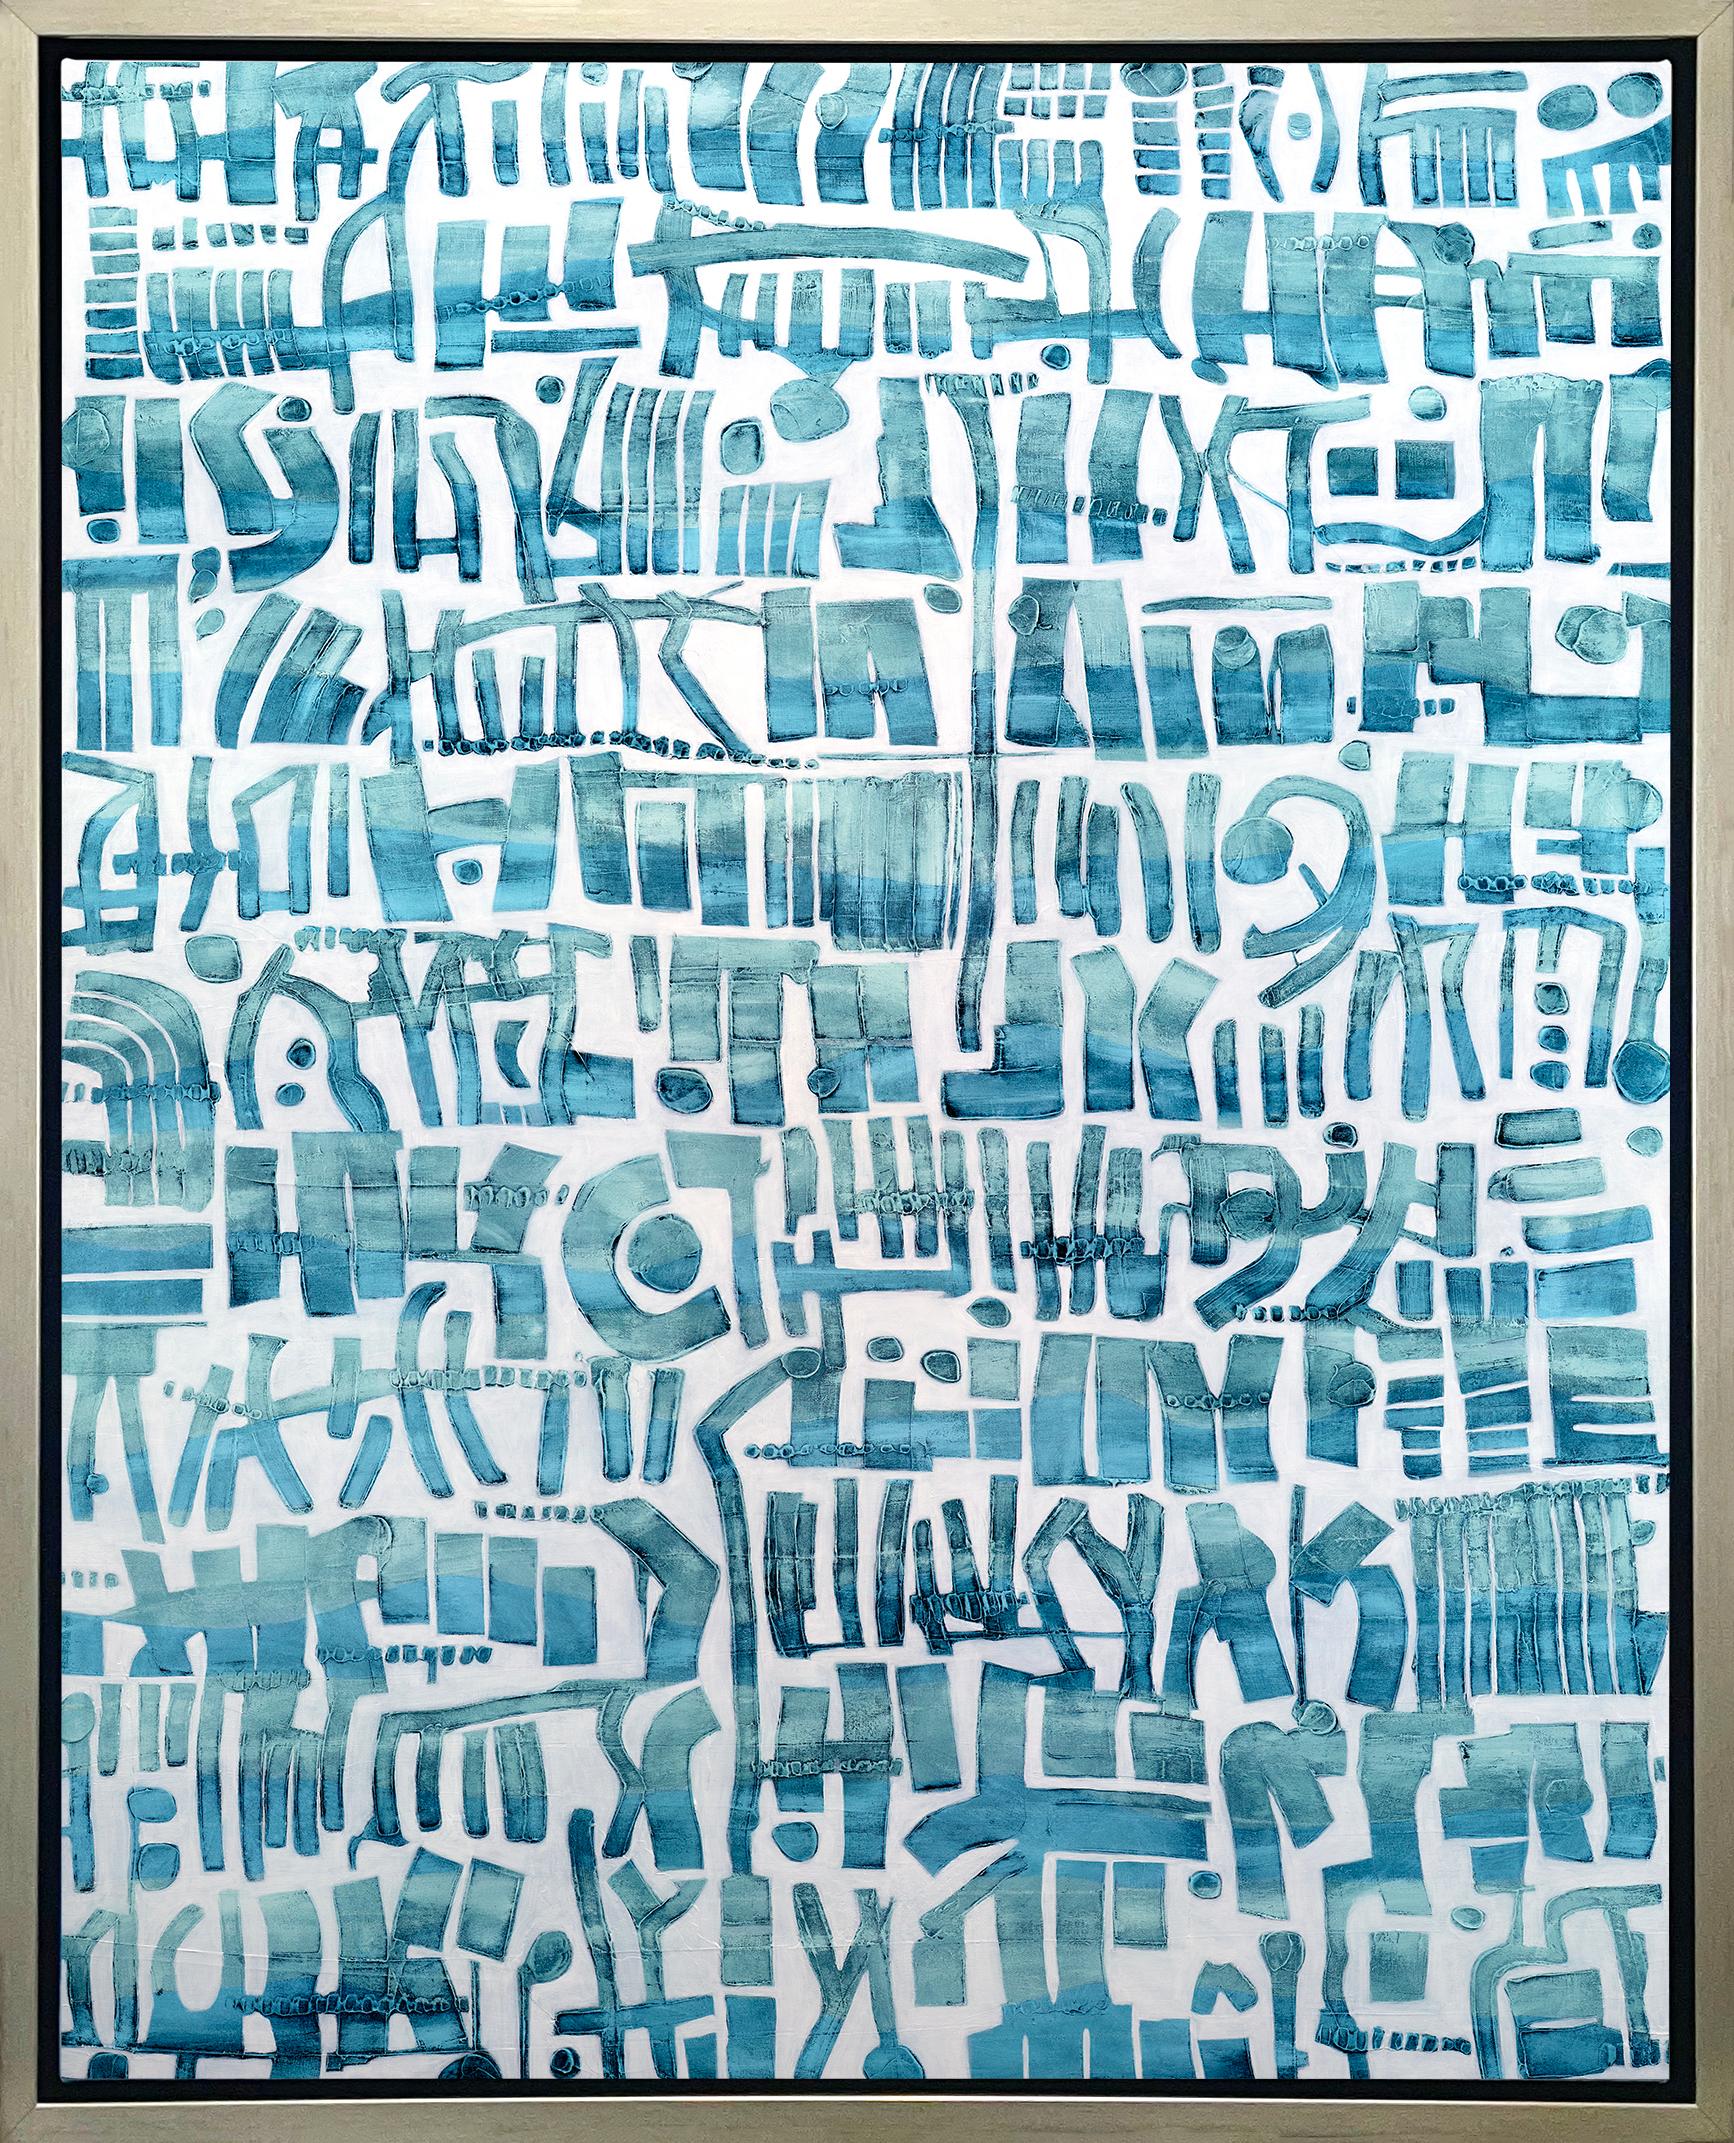 Sofie Swann Abstract Print - "Message in a Bottle, " Framed Limited Edition Giclee Print, 30" x 24"